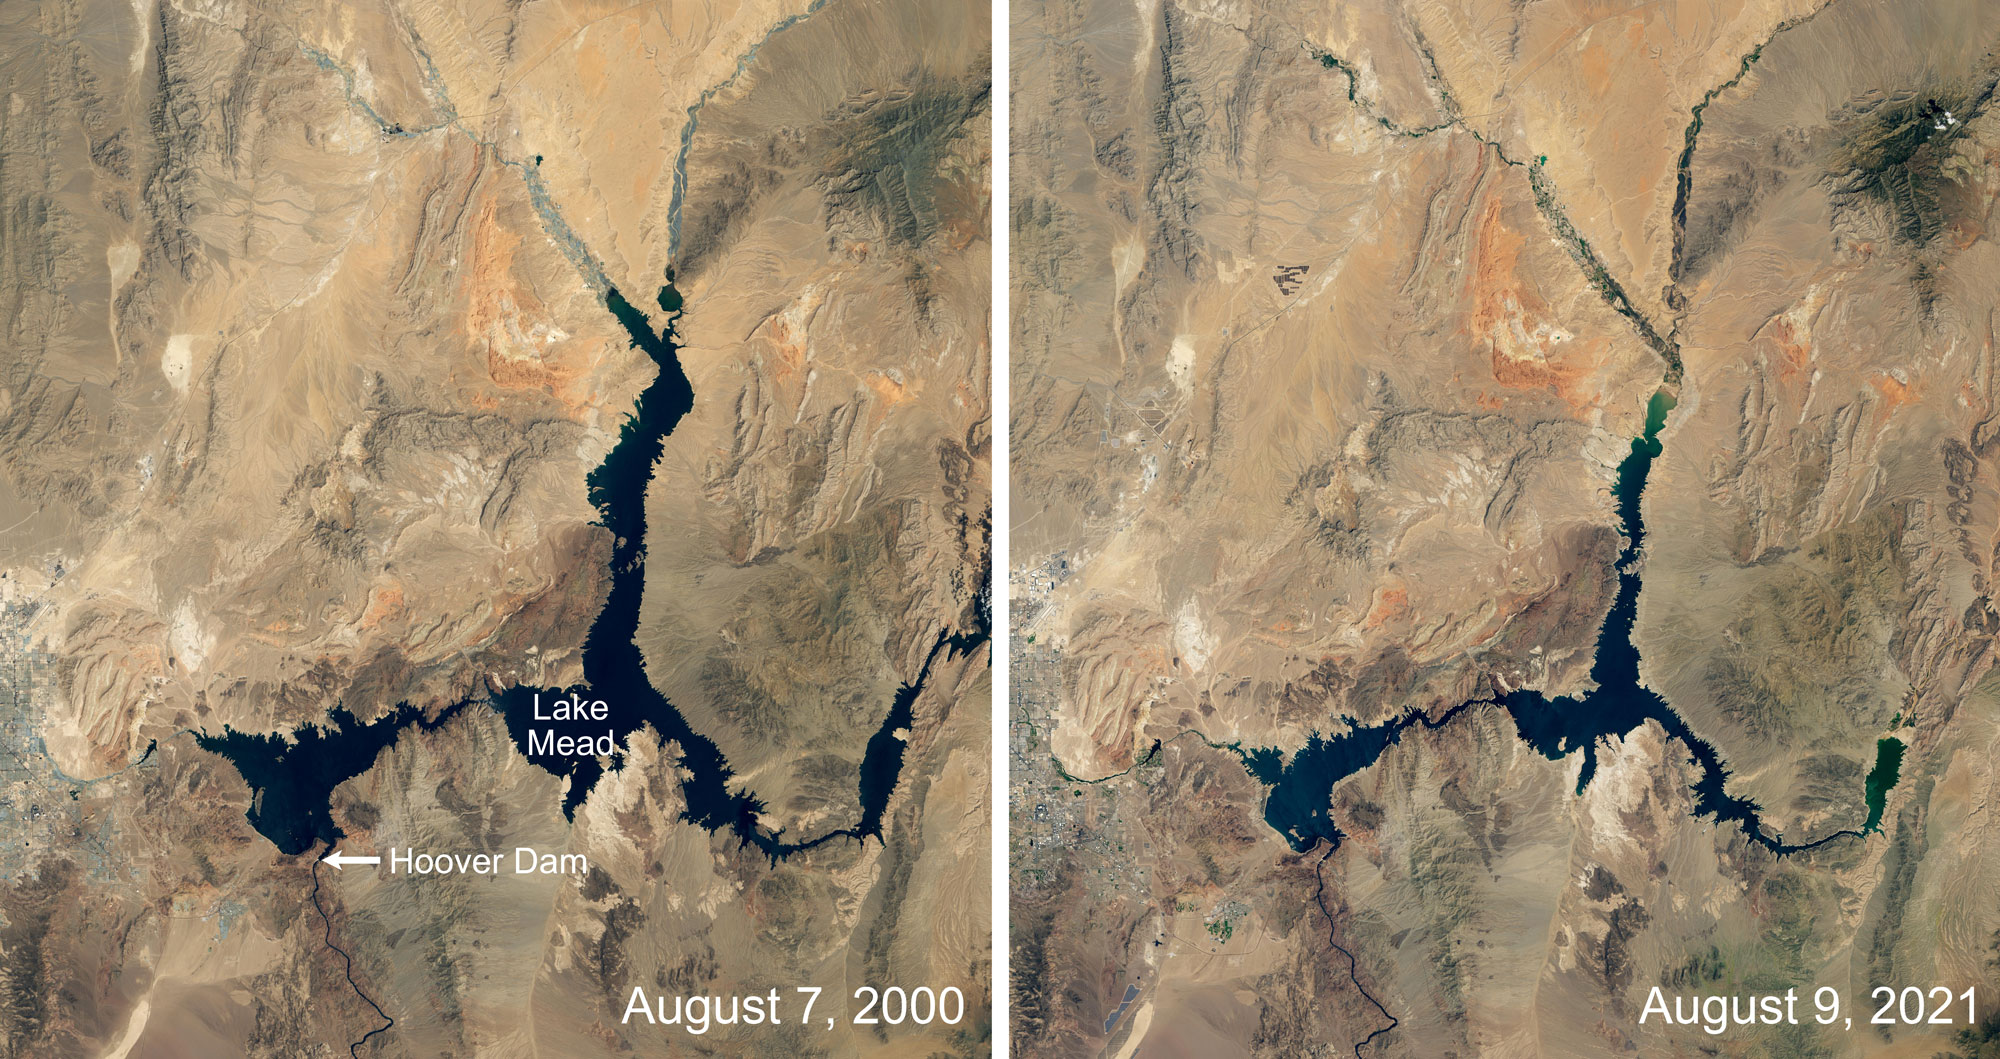 Satellite photographs showing Lake Mead on the Arizona-Nevada border at two points in time: August 7, 2000, and August 6, 2021. In the photo from 2000, the lake covers more area; in 2021, the water level is noticeably lower, as indicated by the arms of the lake being thinner and some parts of the lake appearing to be nearly completely dry.